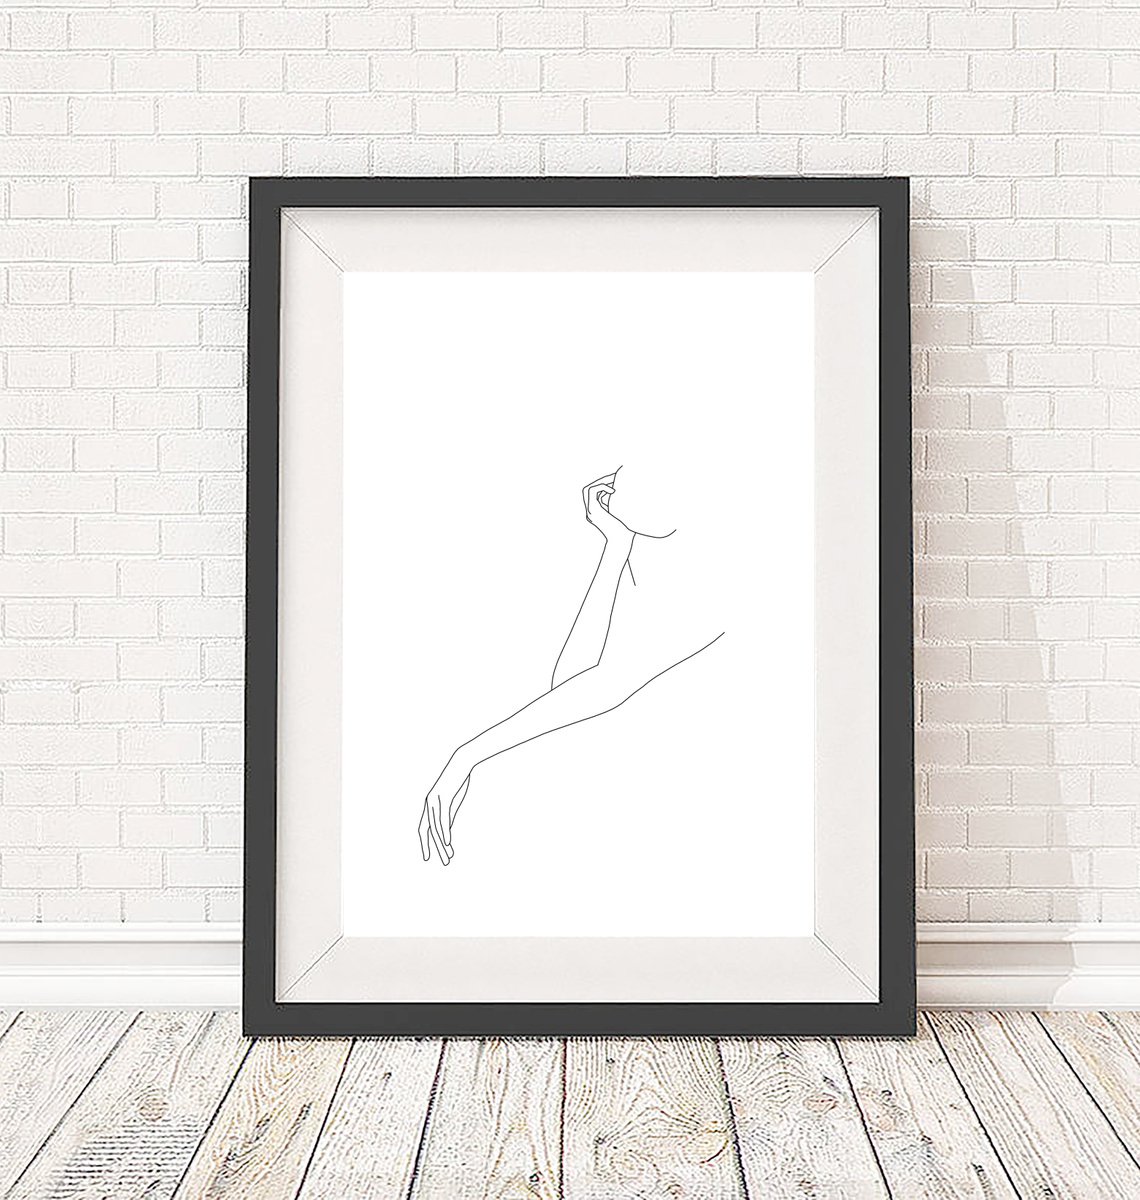 Waiting pose - Cara - Art print by The Colour Study